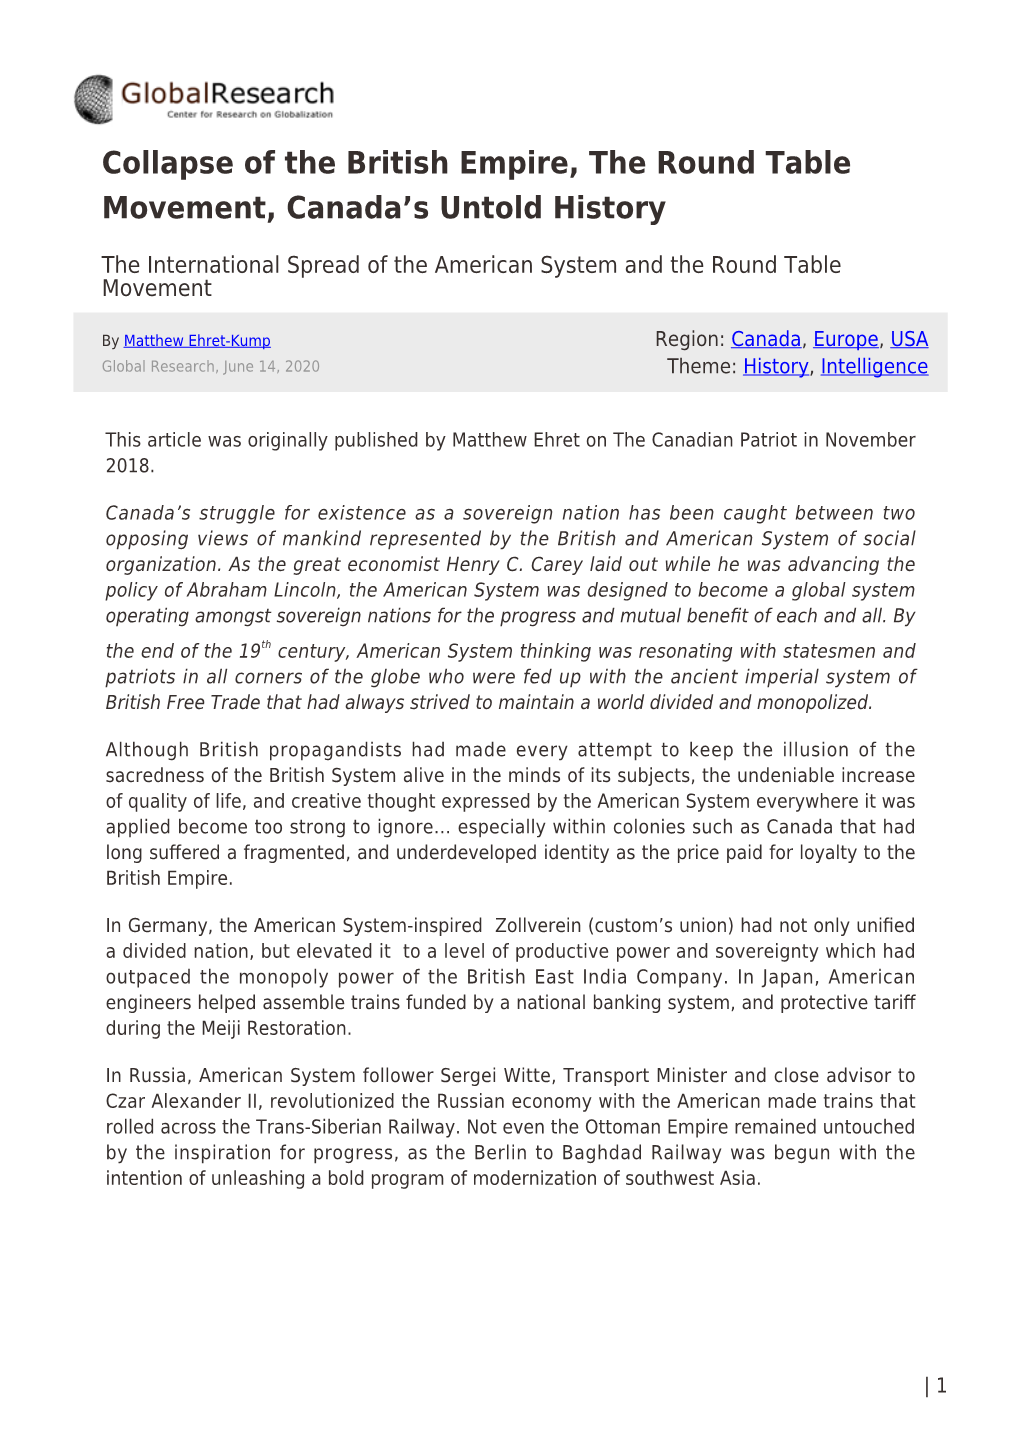 Collapse of the British Empire, the Round Table Movement, Canada’S Untold History